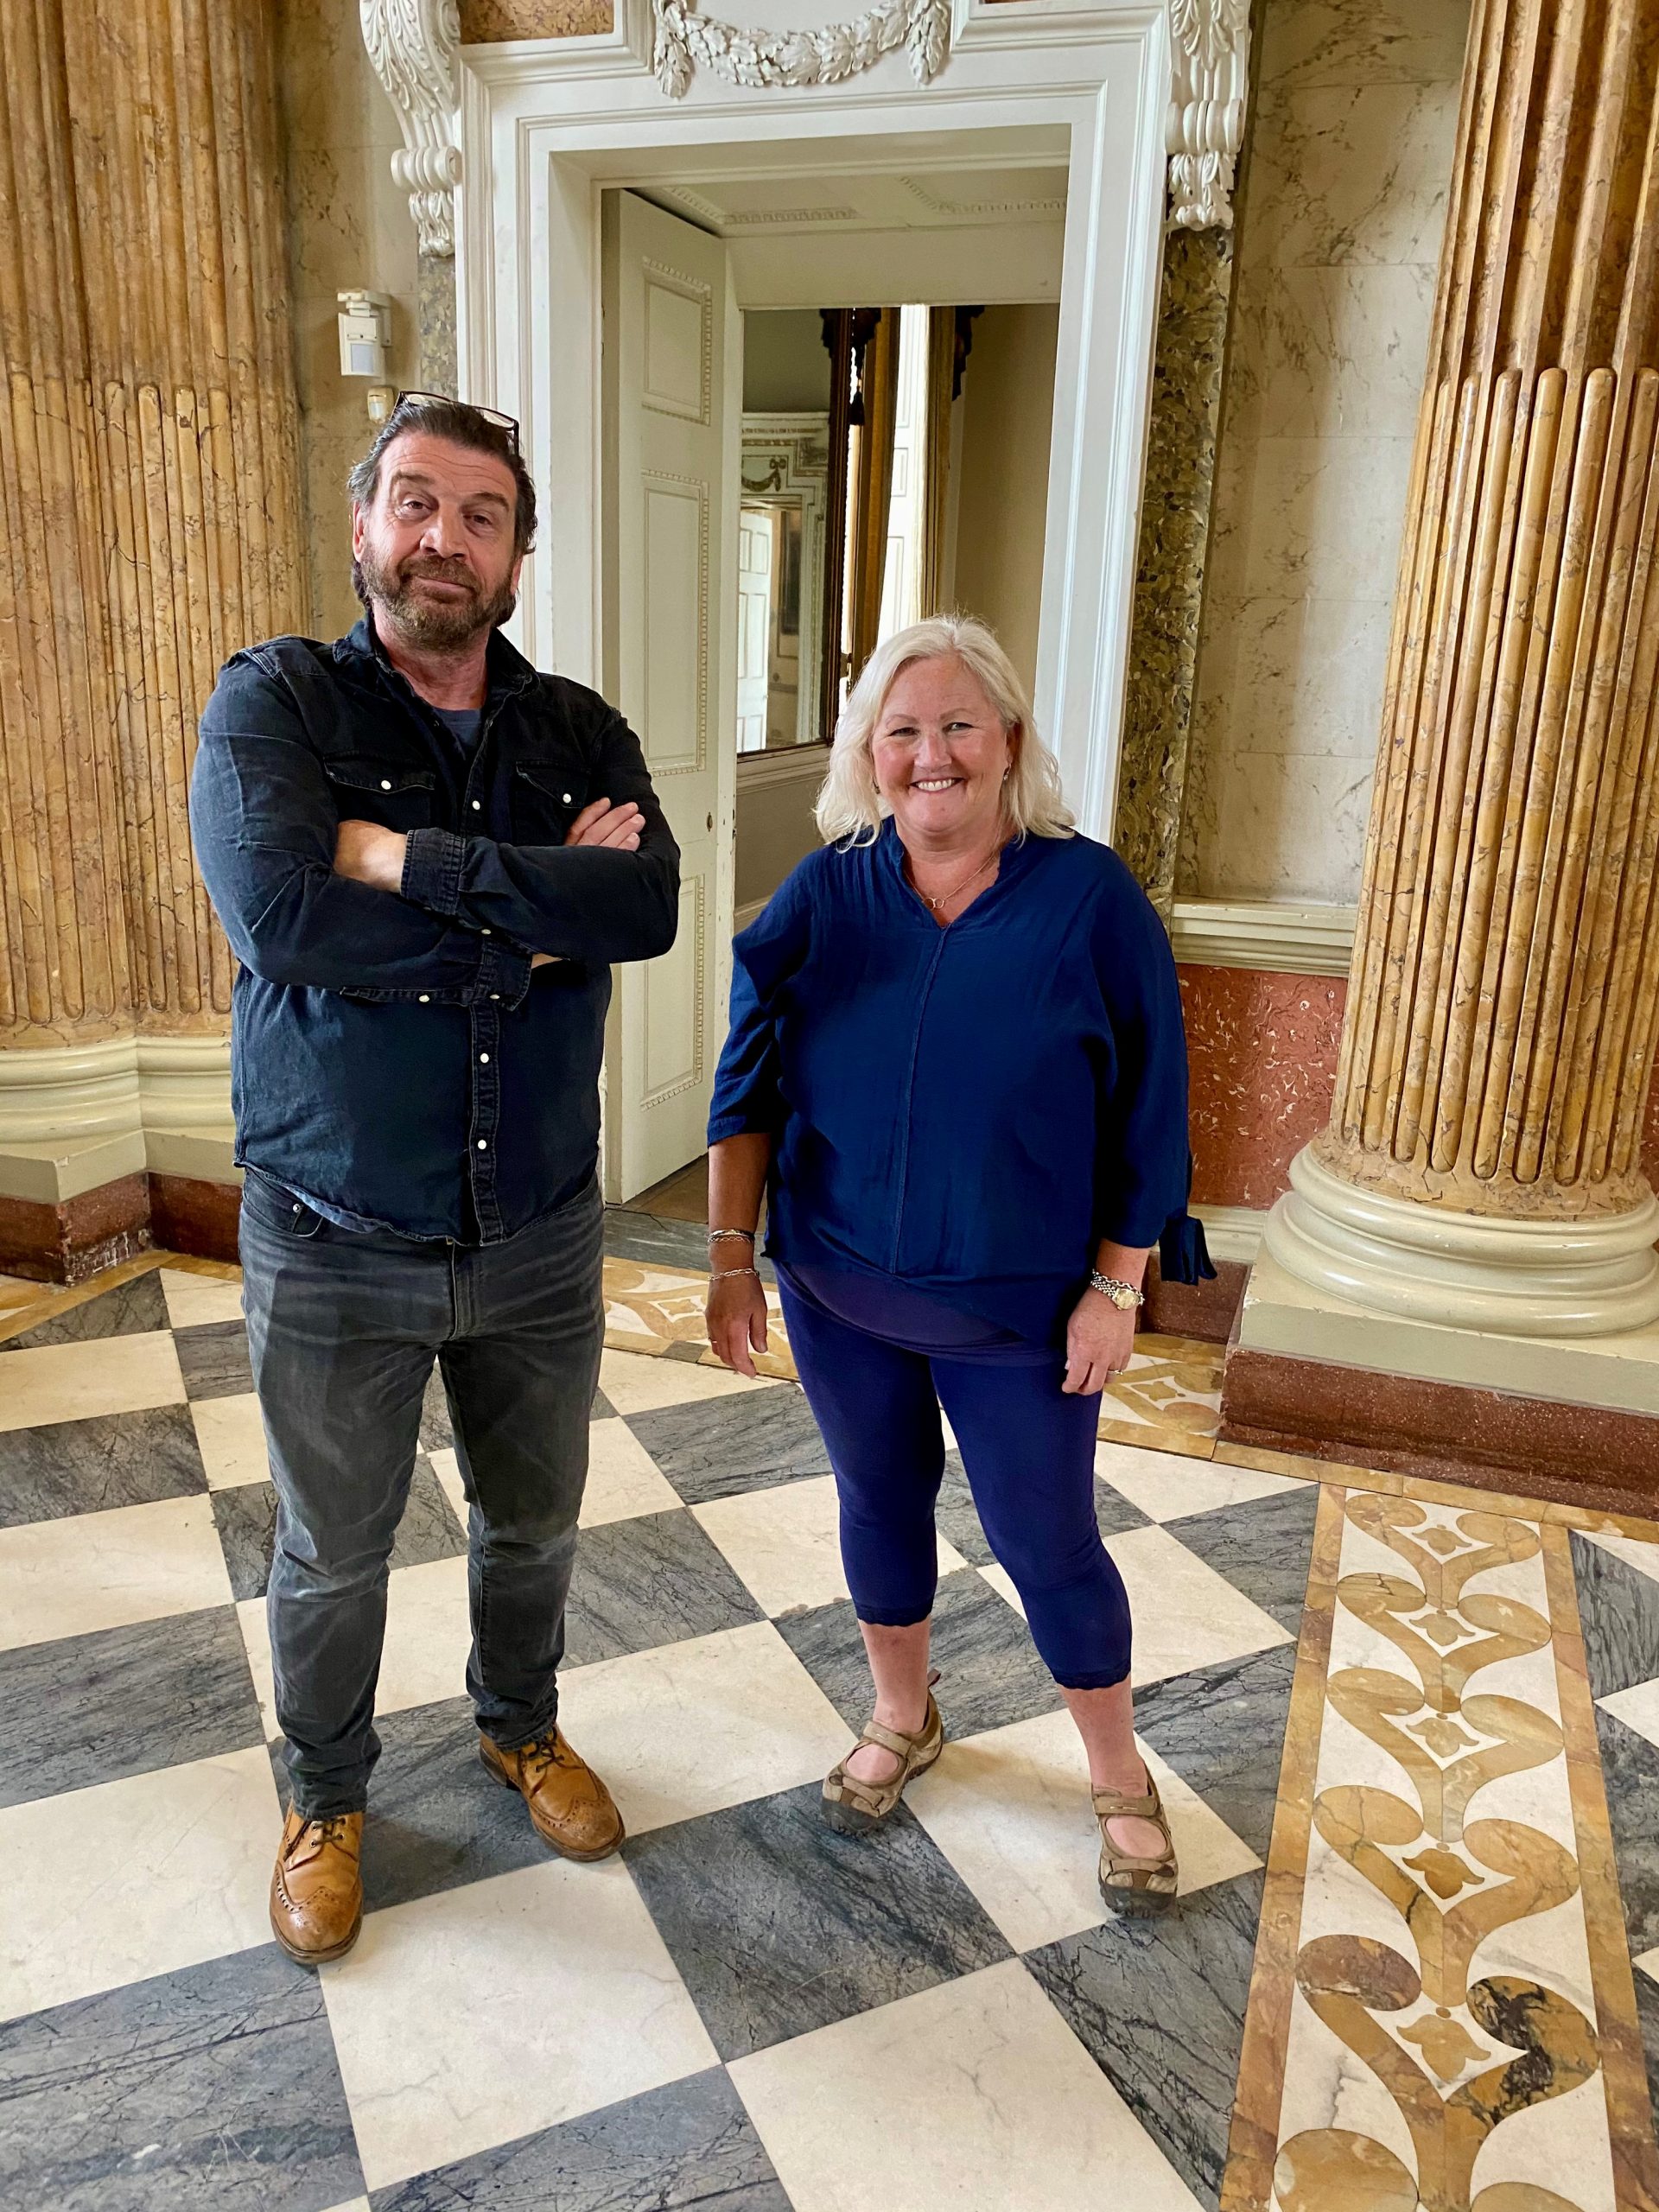 Wentworth Woodhouse to star in Nick Knowles: Heritage Rescue on December 15